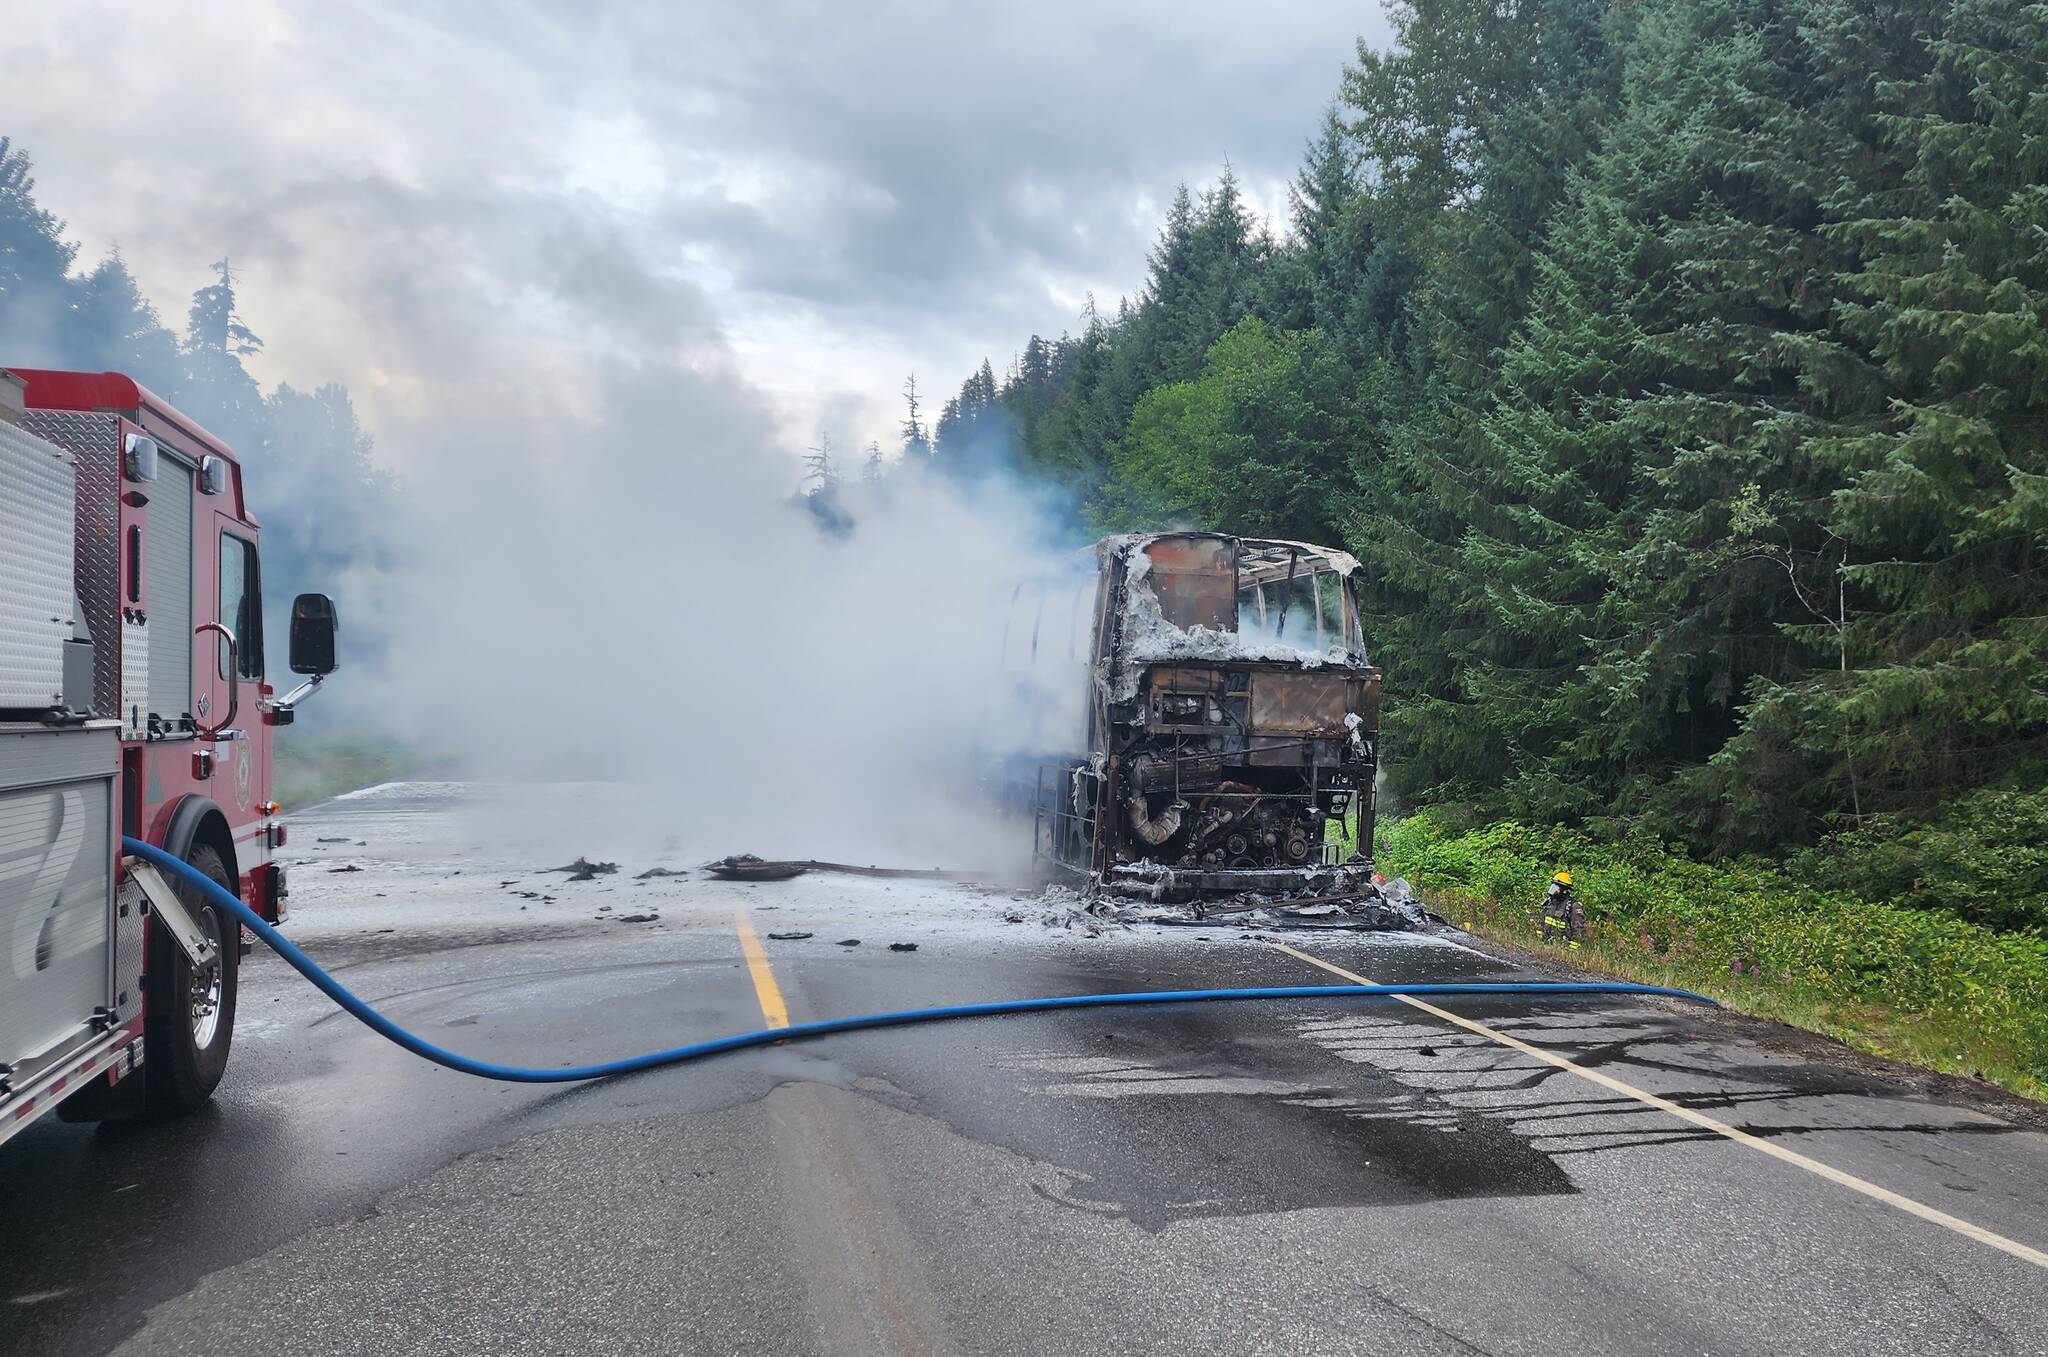 The charred tour bus smoulders on Hwy 16 near Skeena West after a midday fire on July 16 that left 37 international tourists stranded. There were no injuries and the Thornhill Fire Department was quick to respond, helping passengers get back on the road within seven hours. (Thornhill Fire Department photo)